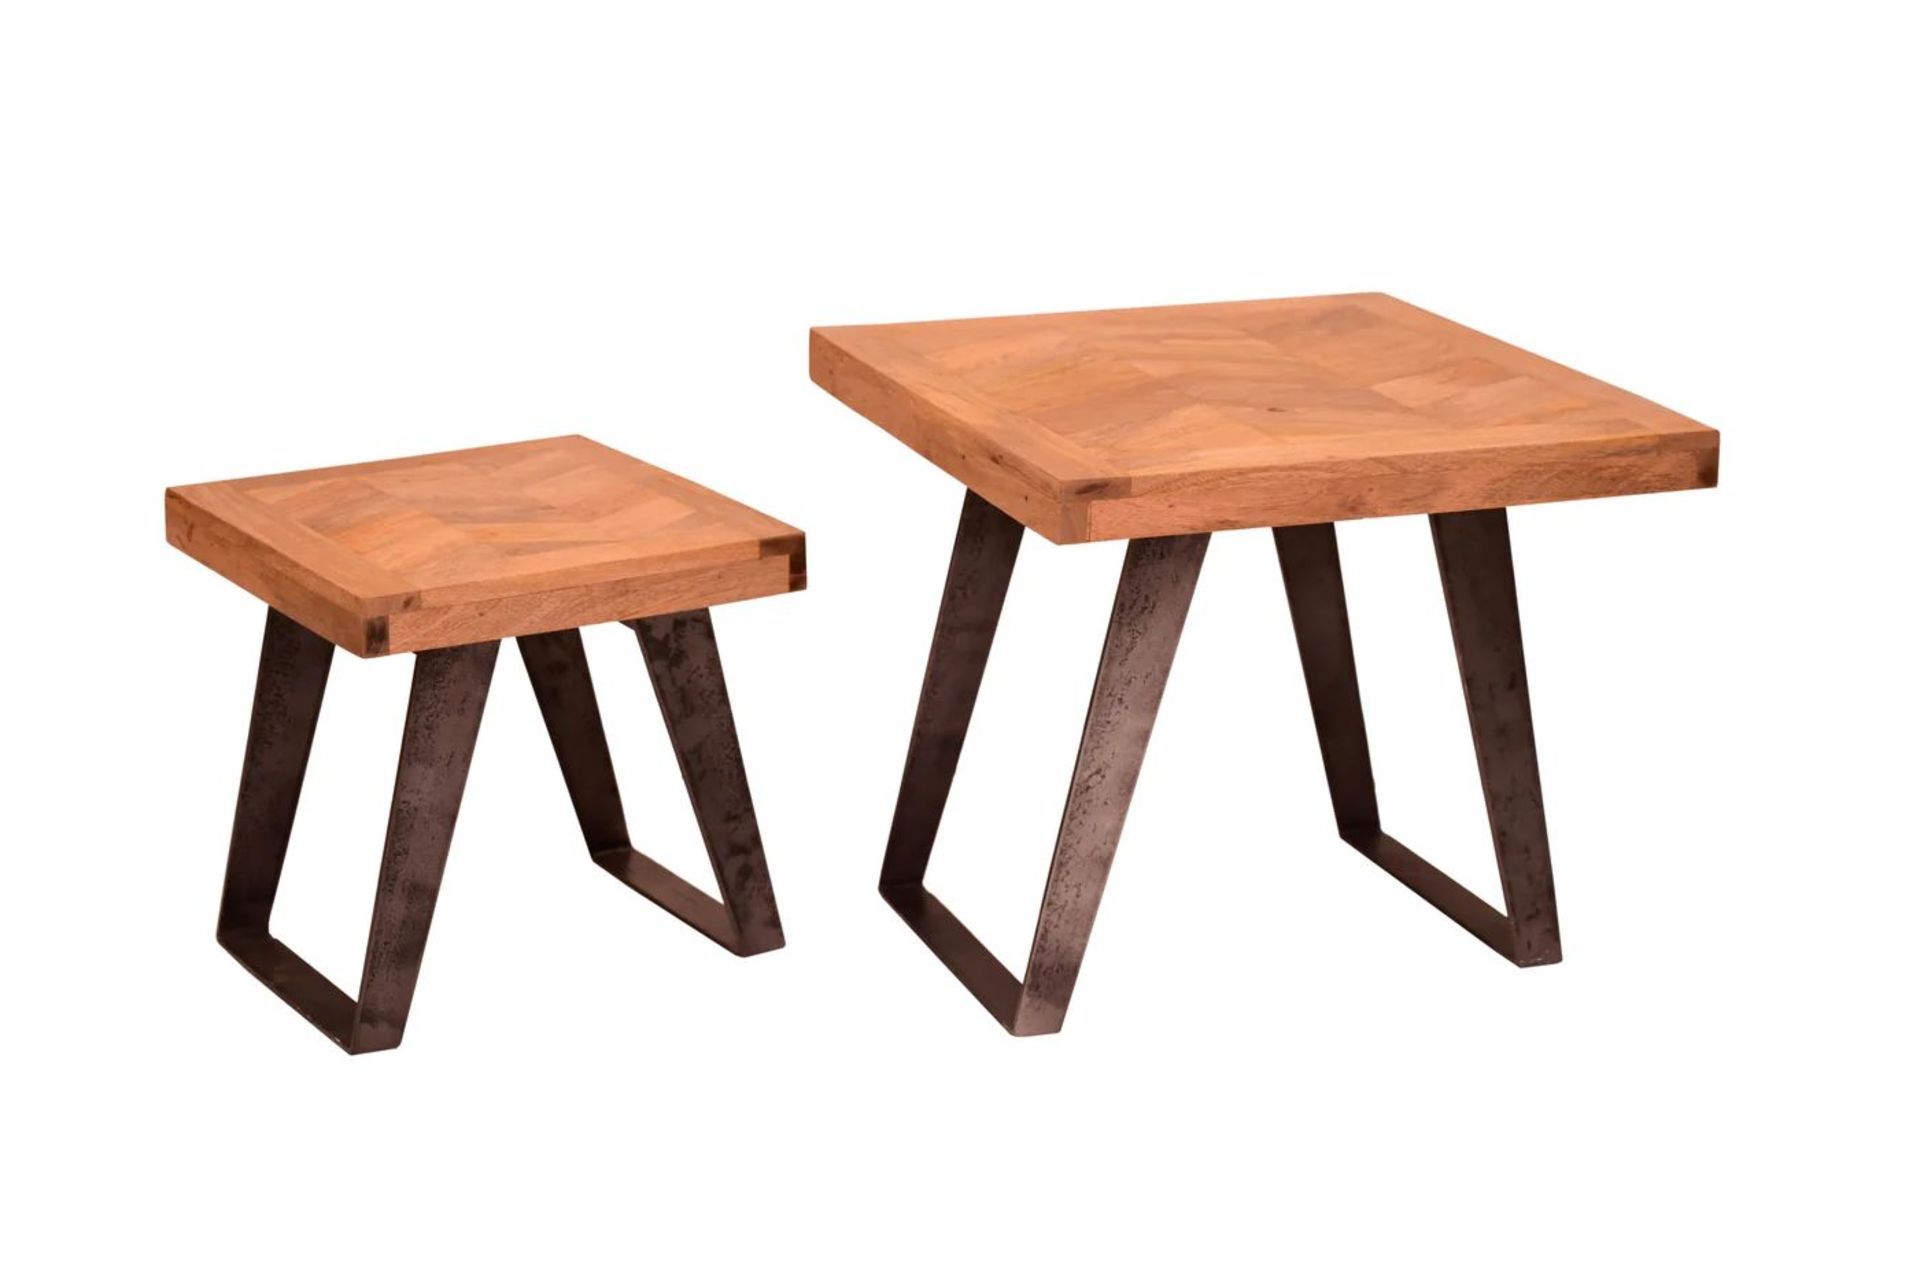 2 X BRAND NEW AGRA NEST OF TABLES R19-2